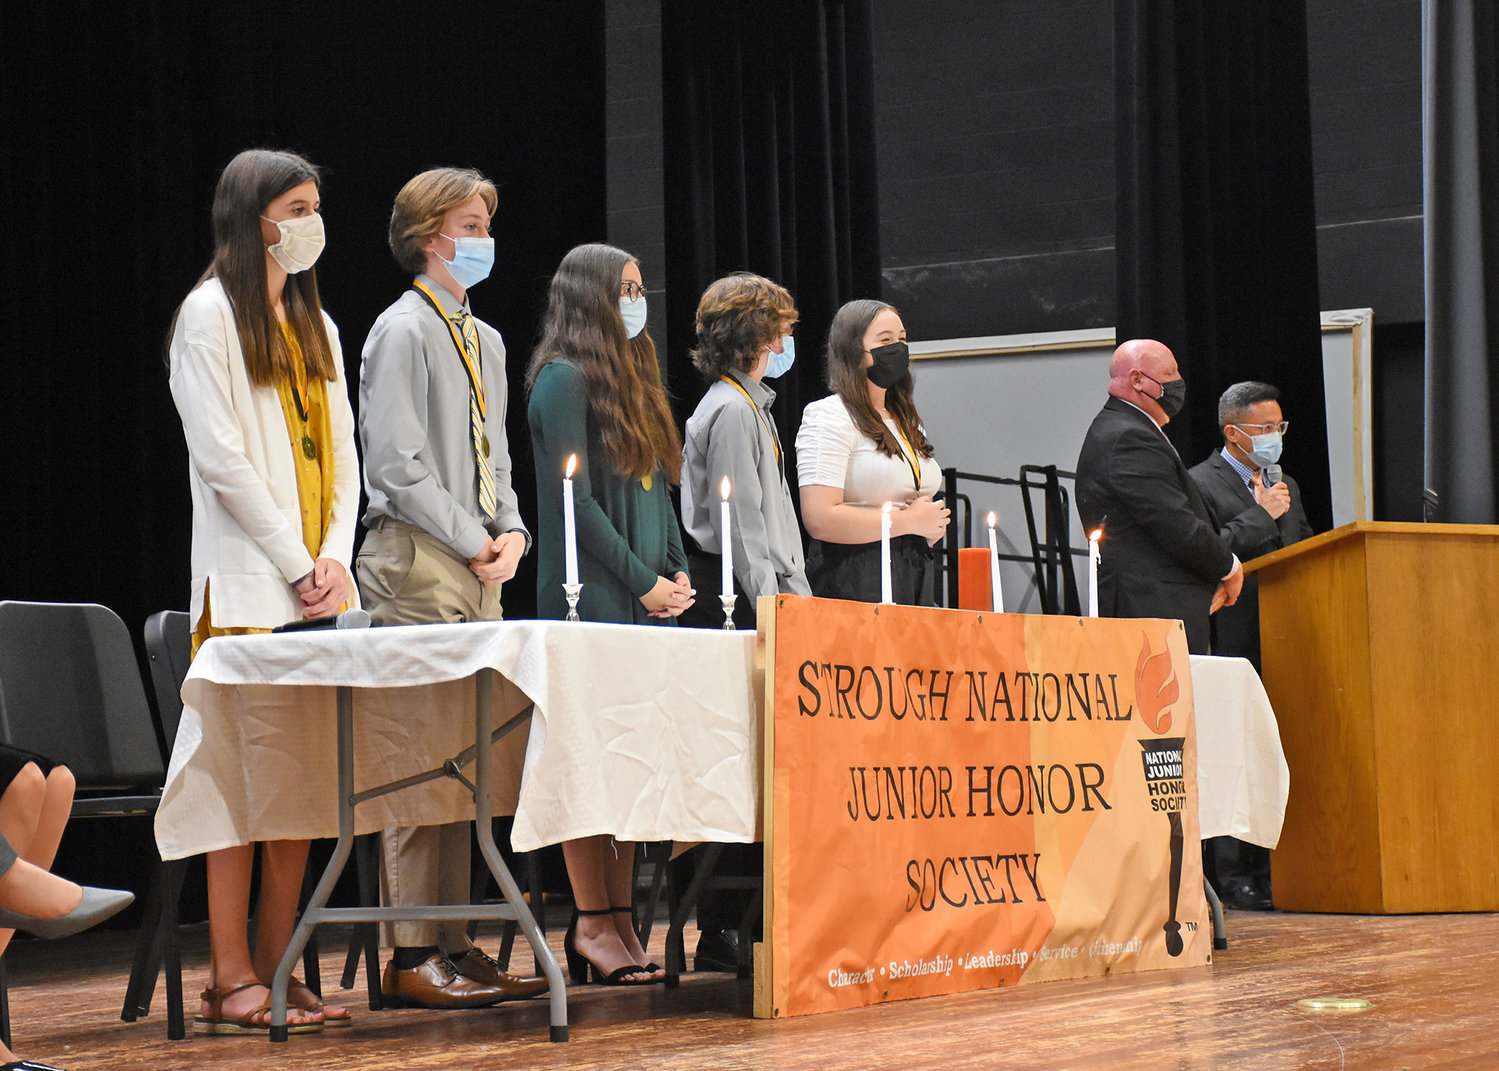 LIGHTING THE CANDLES — Five students participated in a candle-lighting ceremony during the National Junior Honor Society induction ceremony at Strough Middle School, with candles symbolizing five categories. Among them: Scholarship, Hannah Clark; Service, Jacob Bruno; Character, Kadence Barton; Leadership, Jaemeson Keith; Citizenship, Madeline Feeney.